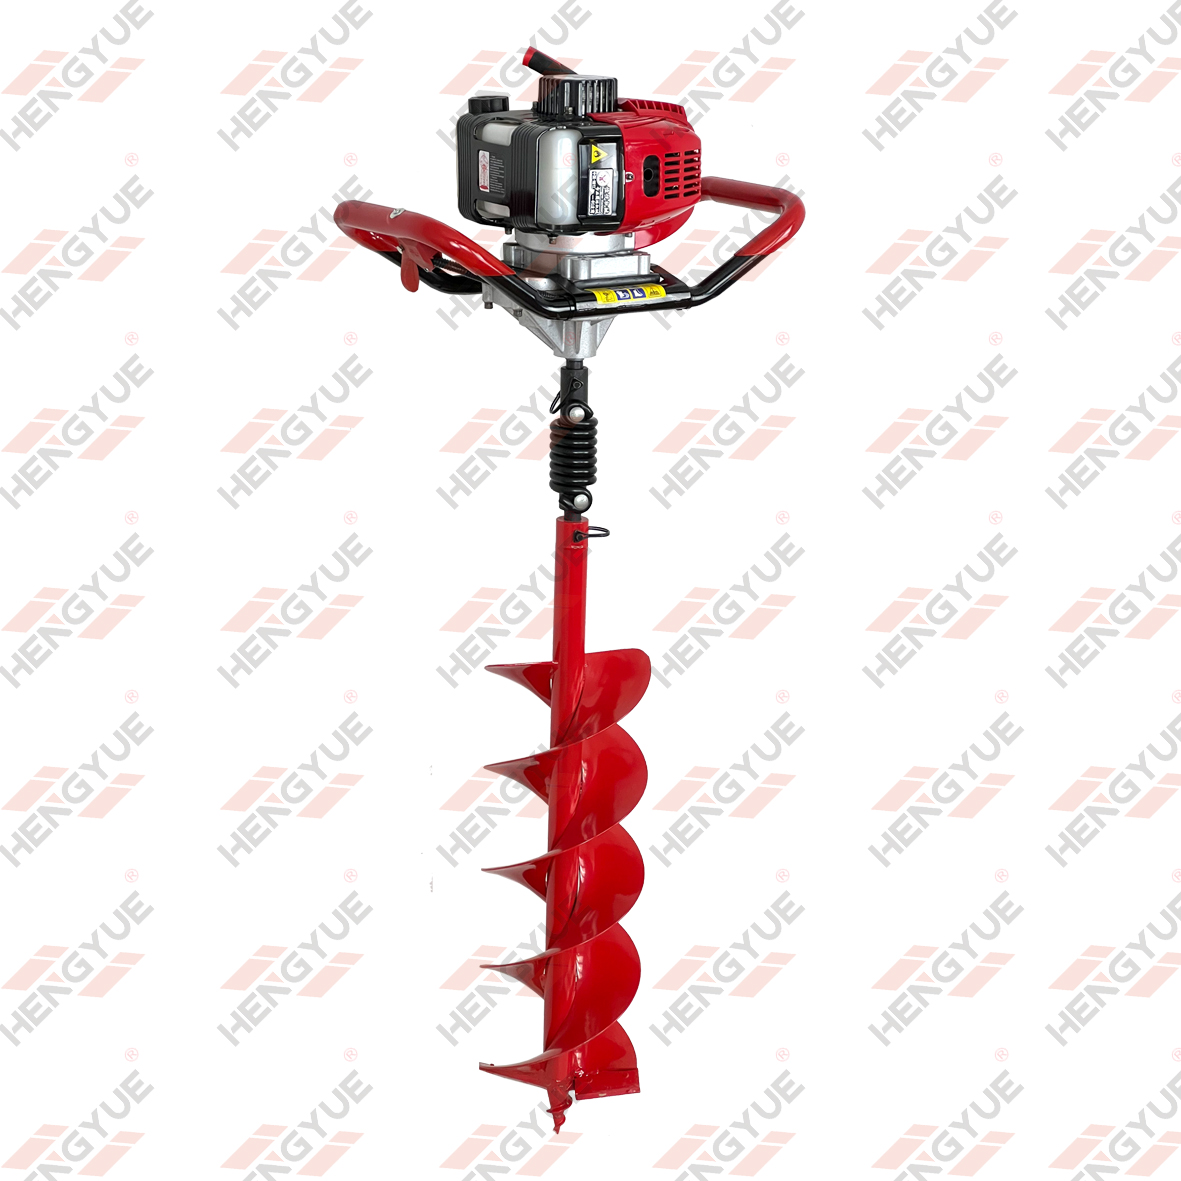 Powered by HONDA GX50 Hand Held Earth Auger Drilling Machine